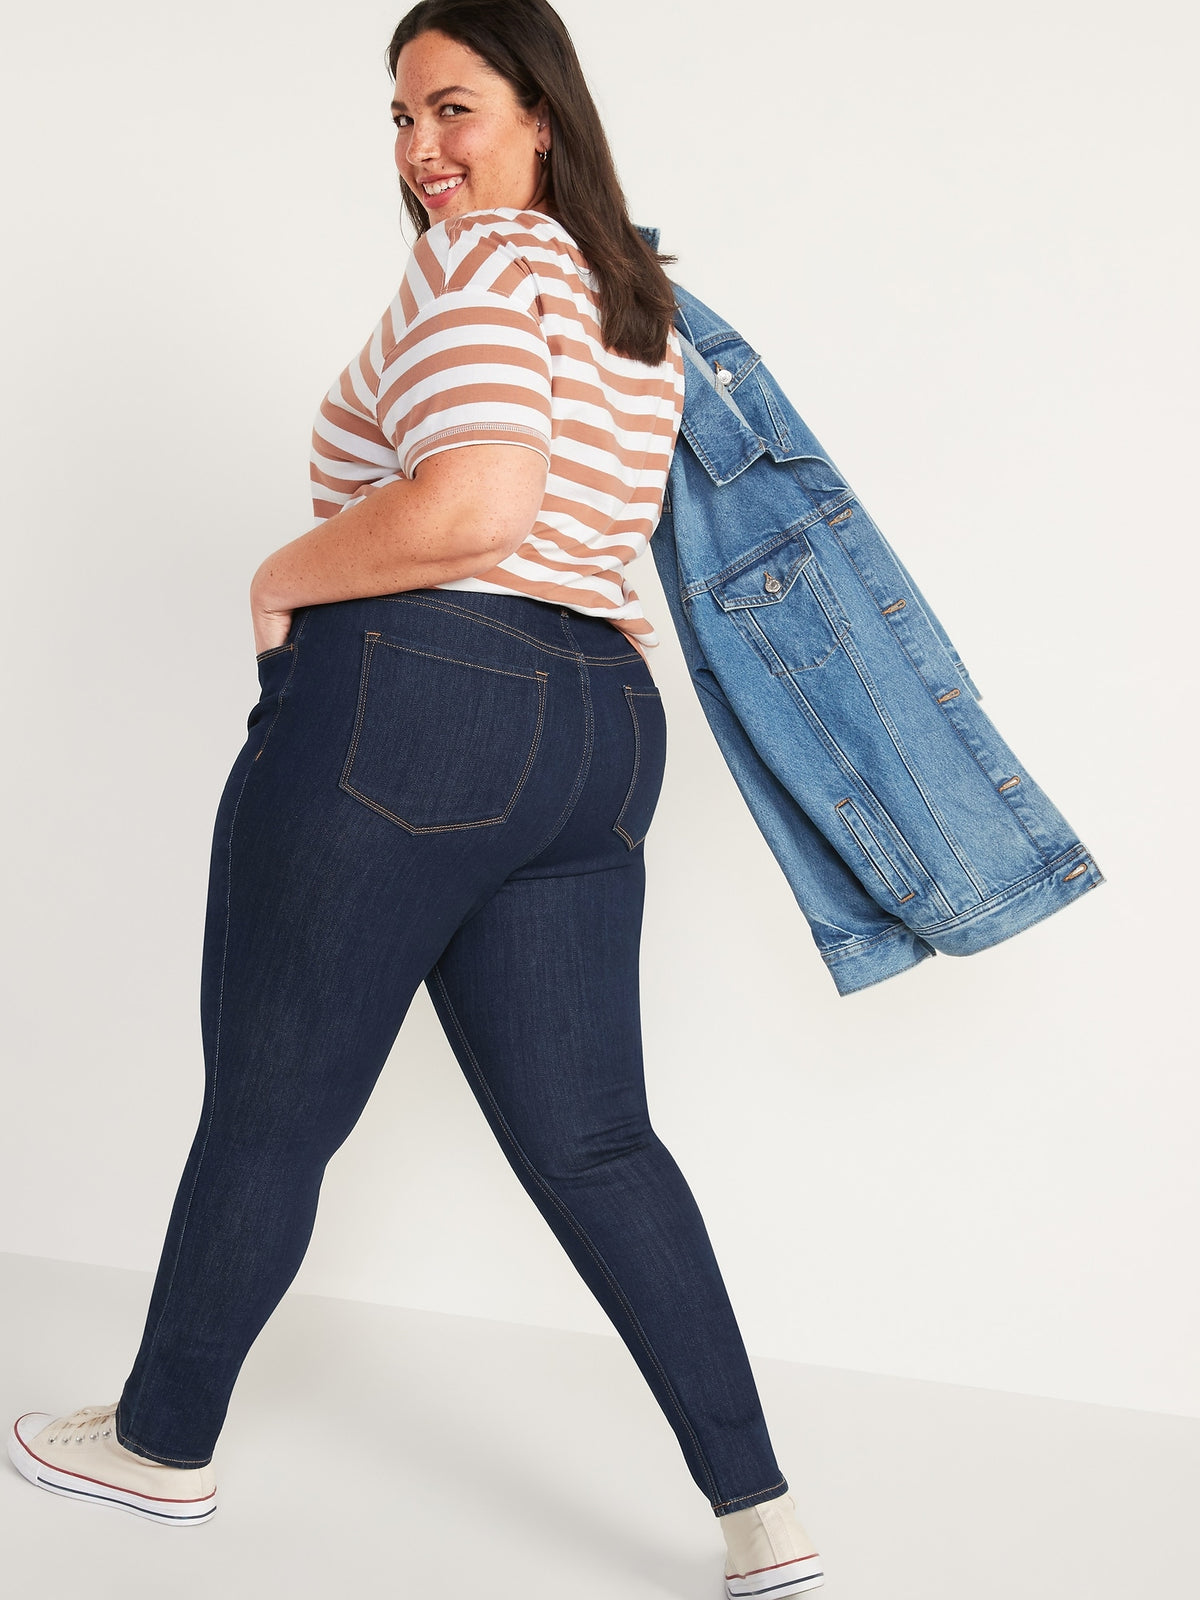 High-Waisted Dark-Wash Super Skinny Jeans for Women - Old Navy